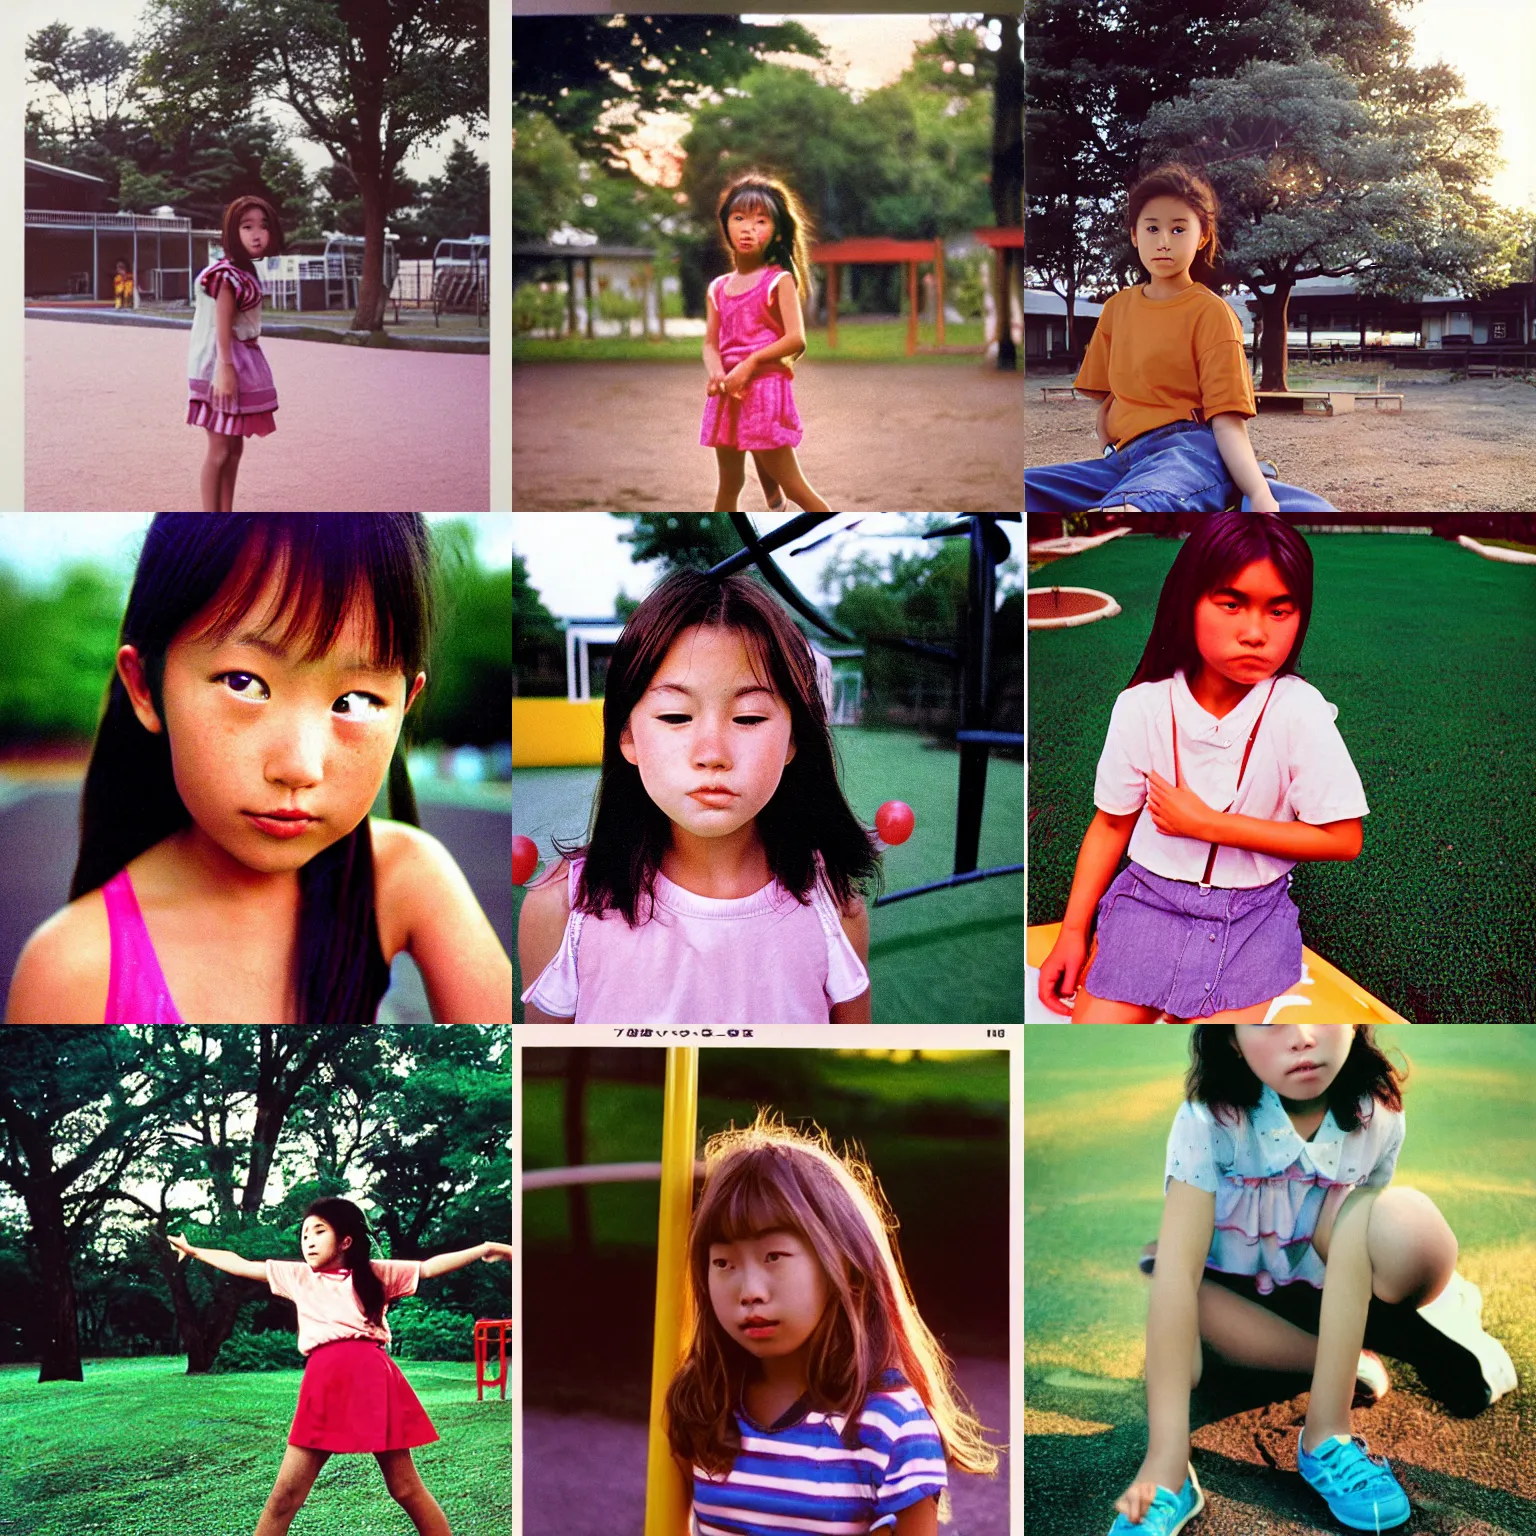 Prompt: A long-shot from front, color outdoor photograph portrait of a teen girl playing on the playground, summer, sunset lighting, 1990 photo from Japanese photograph Magazine.